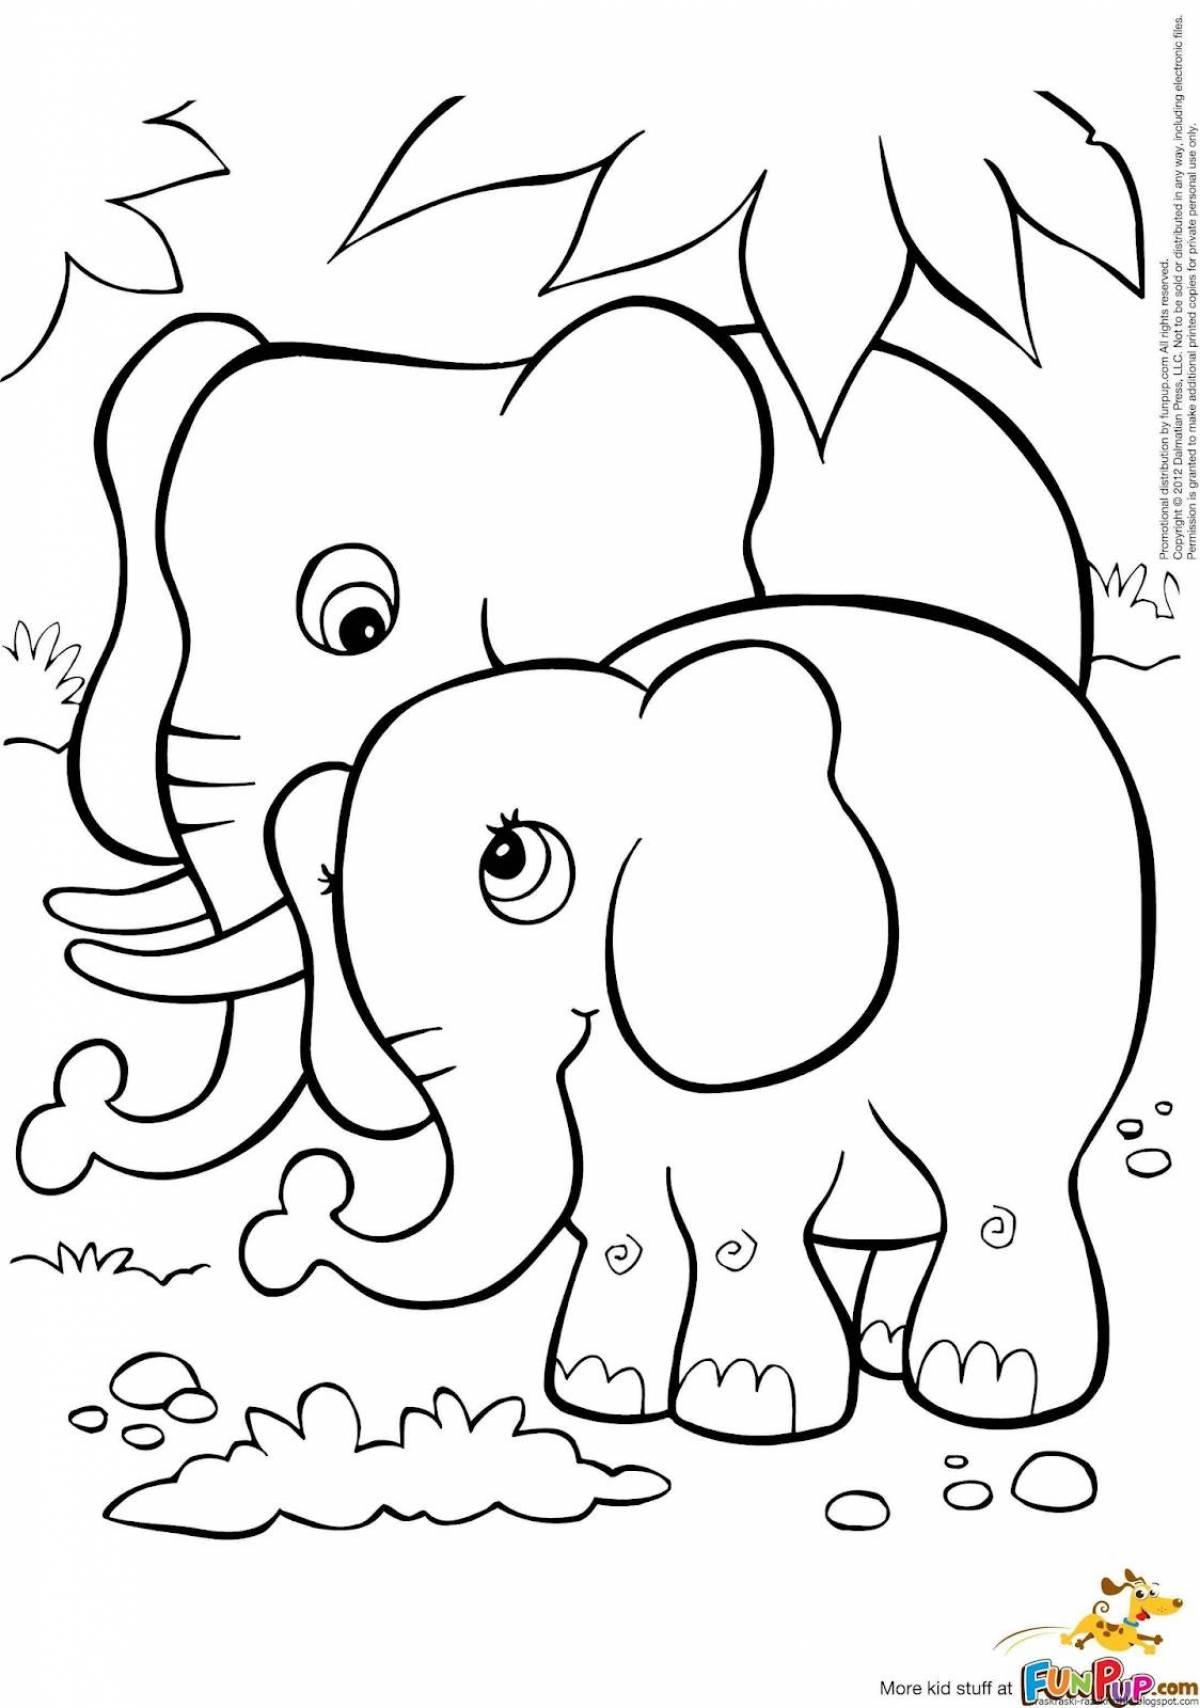 Tempting baby elephant coloring book